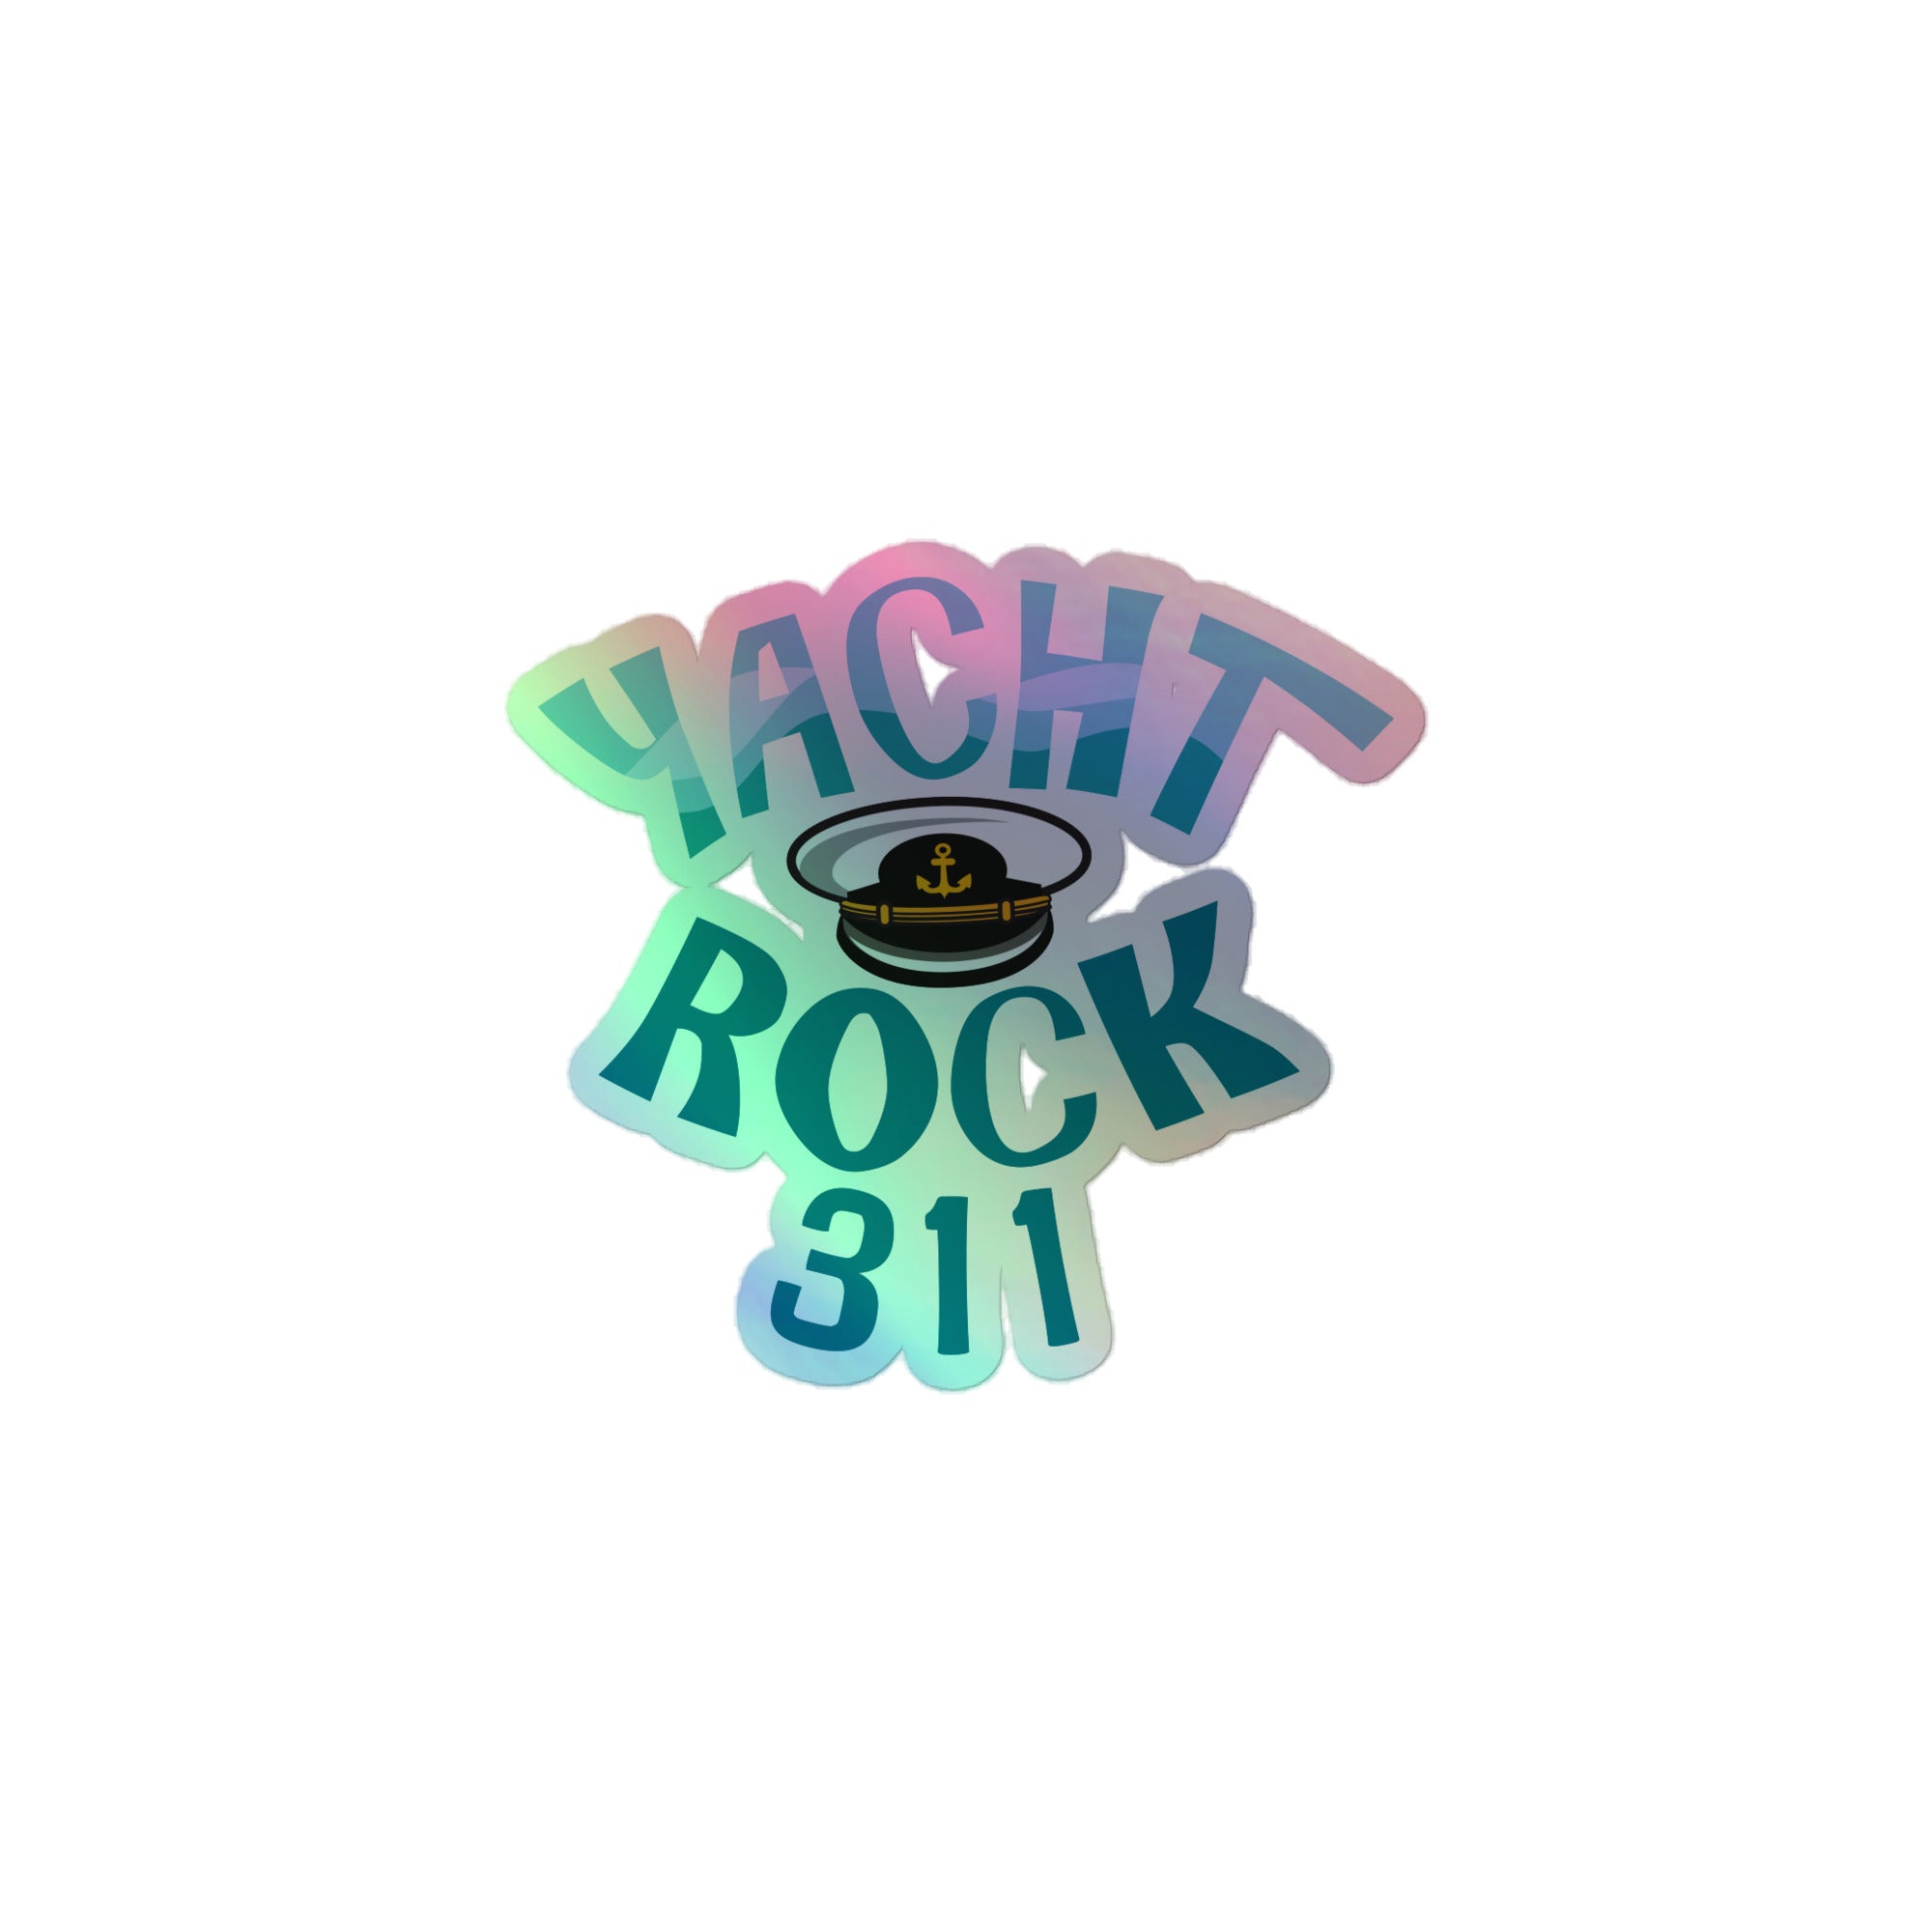 Yacht Rock: Holographic Sticker